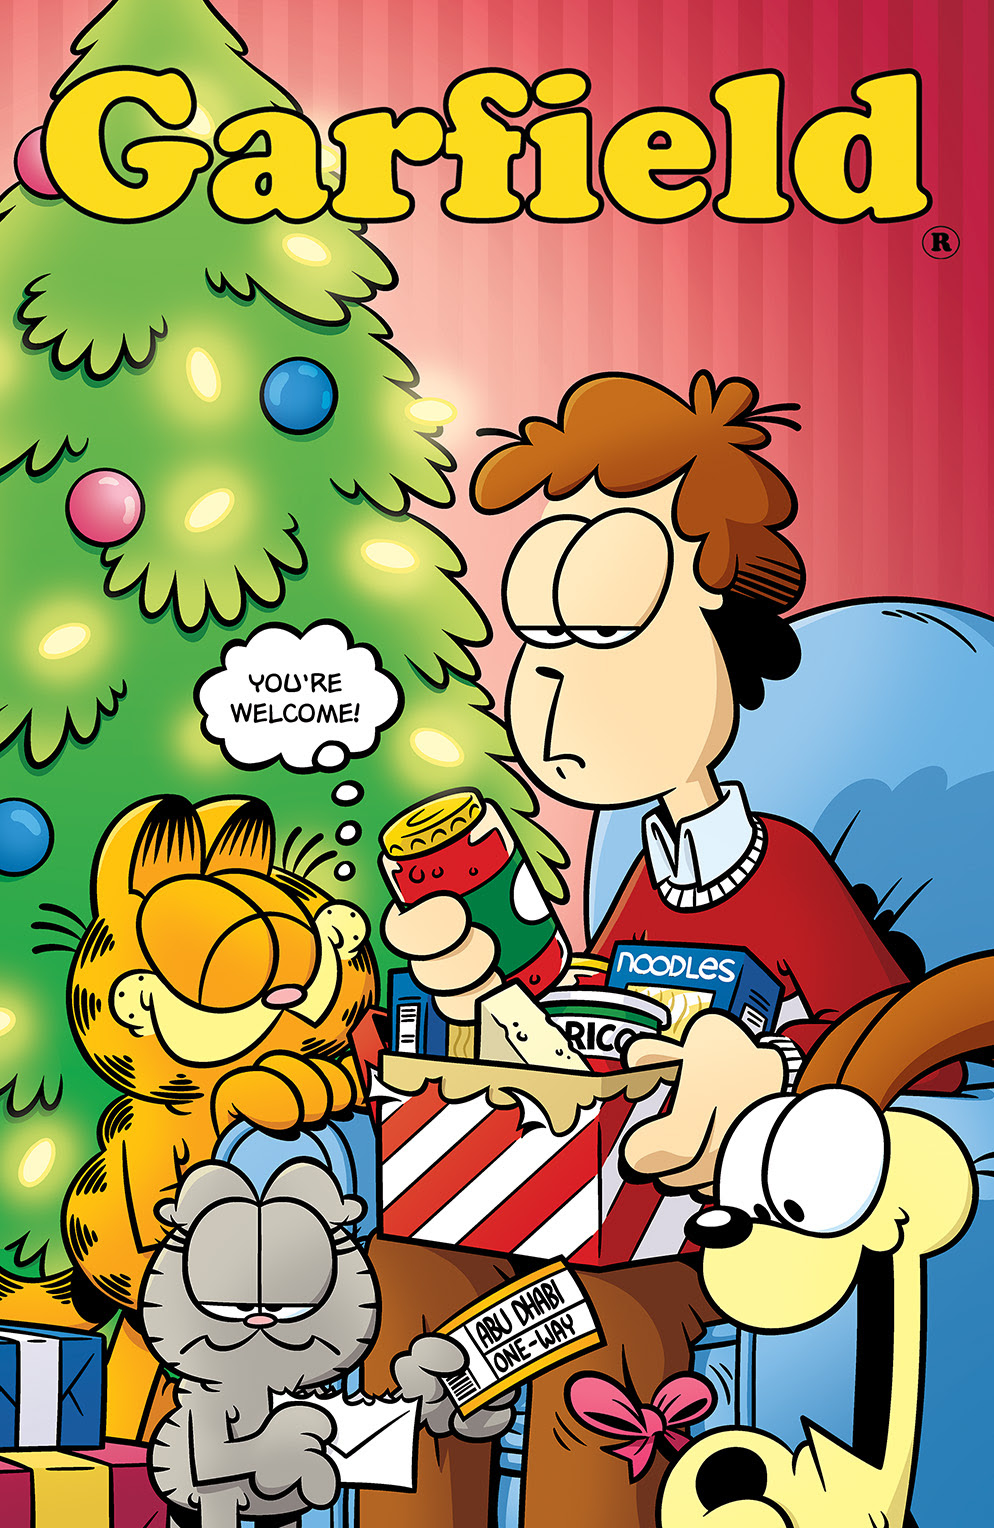 GARFIELD #32 Cover by Andy Hirsch